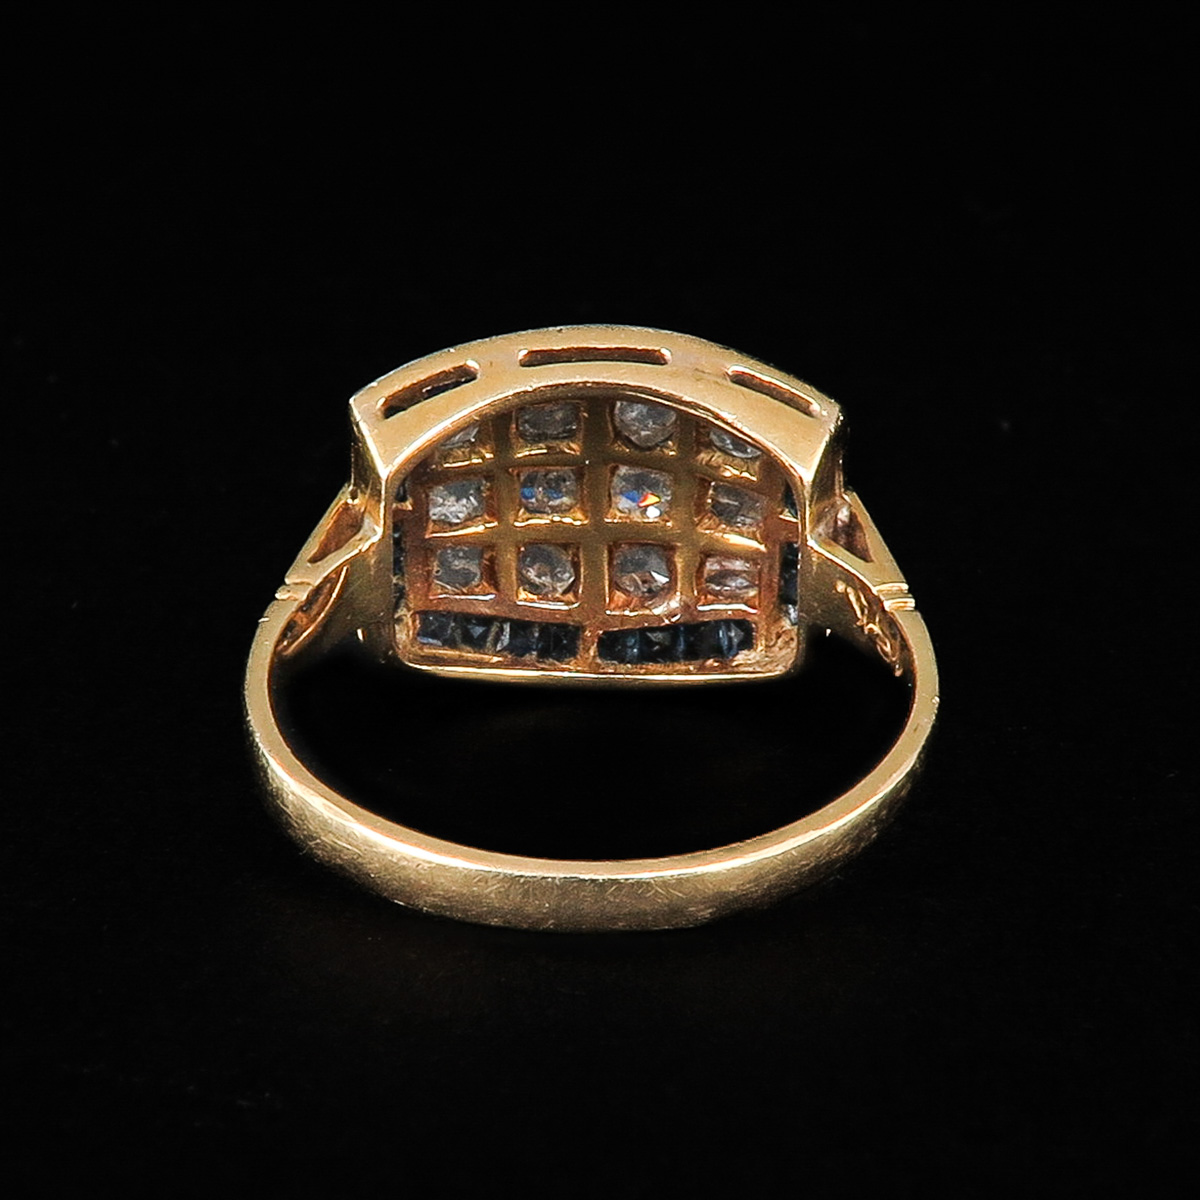 A Ladies Diamond and Sapphire Ring - Image 3 of 5